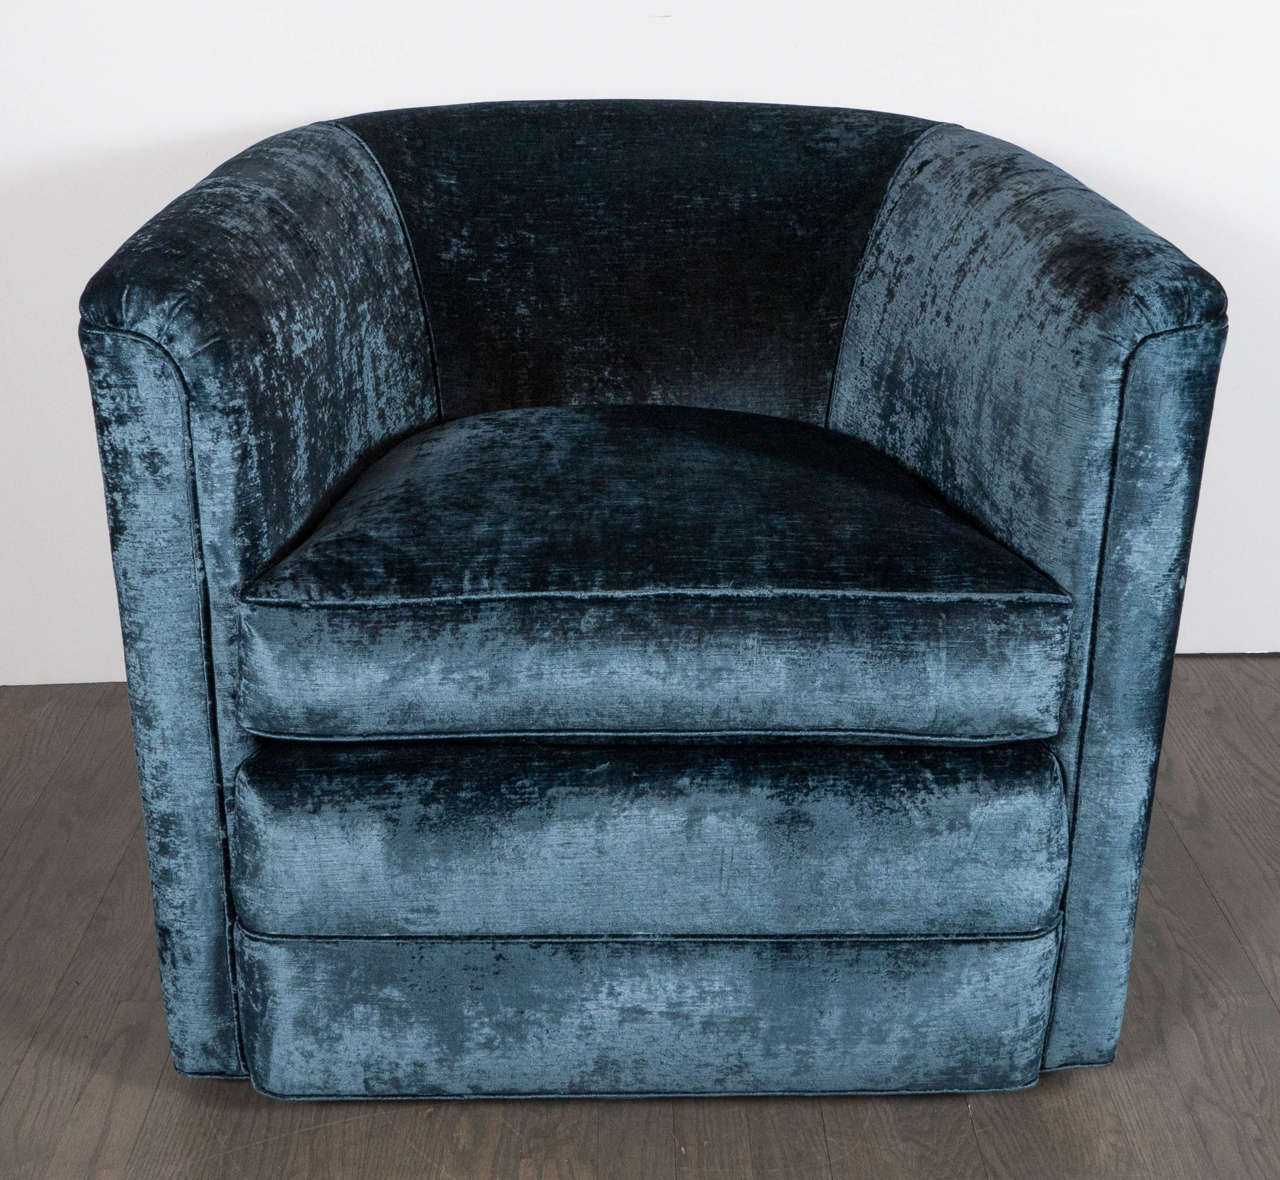 This exceptional pair of Mid-Century Modernist swivel club chairs are by Milo Baughman. They feature a sumptuous antique sapphire velvet upholstery and would be perfect in any room or decor. These chairs have been newly upholstered and mint restored